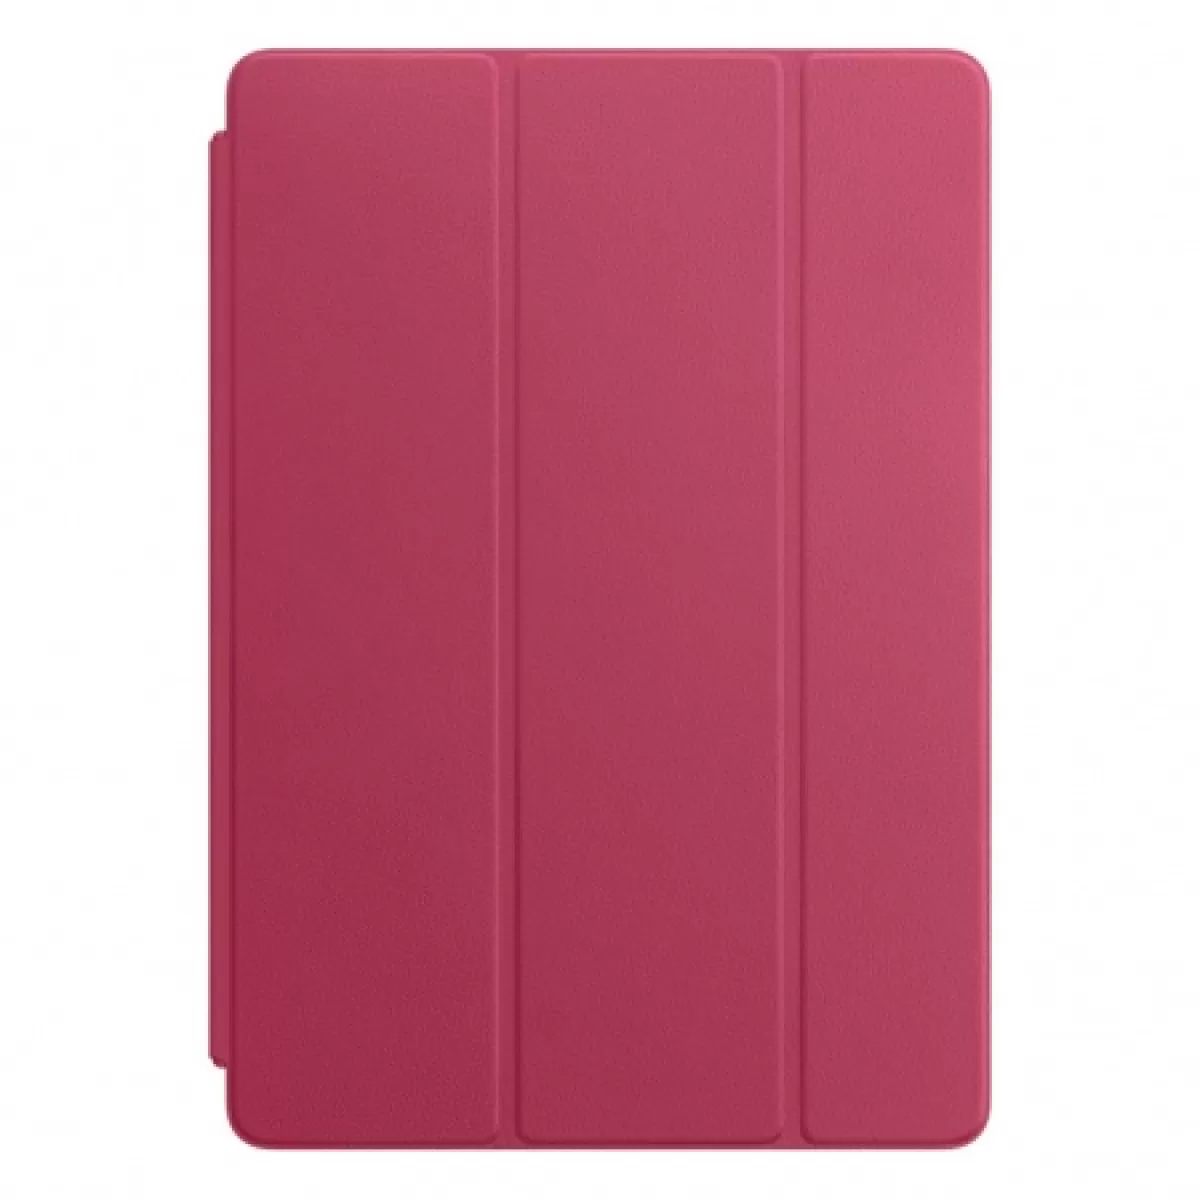 Apple Leather Smart Cover for 10.5inch iPad Pro Pink Fuchsia